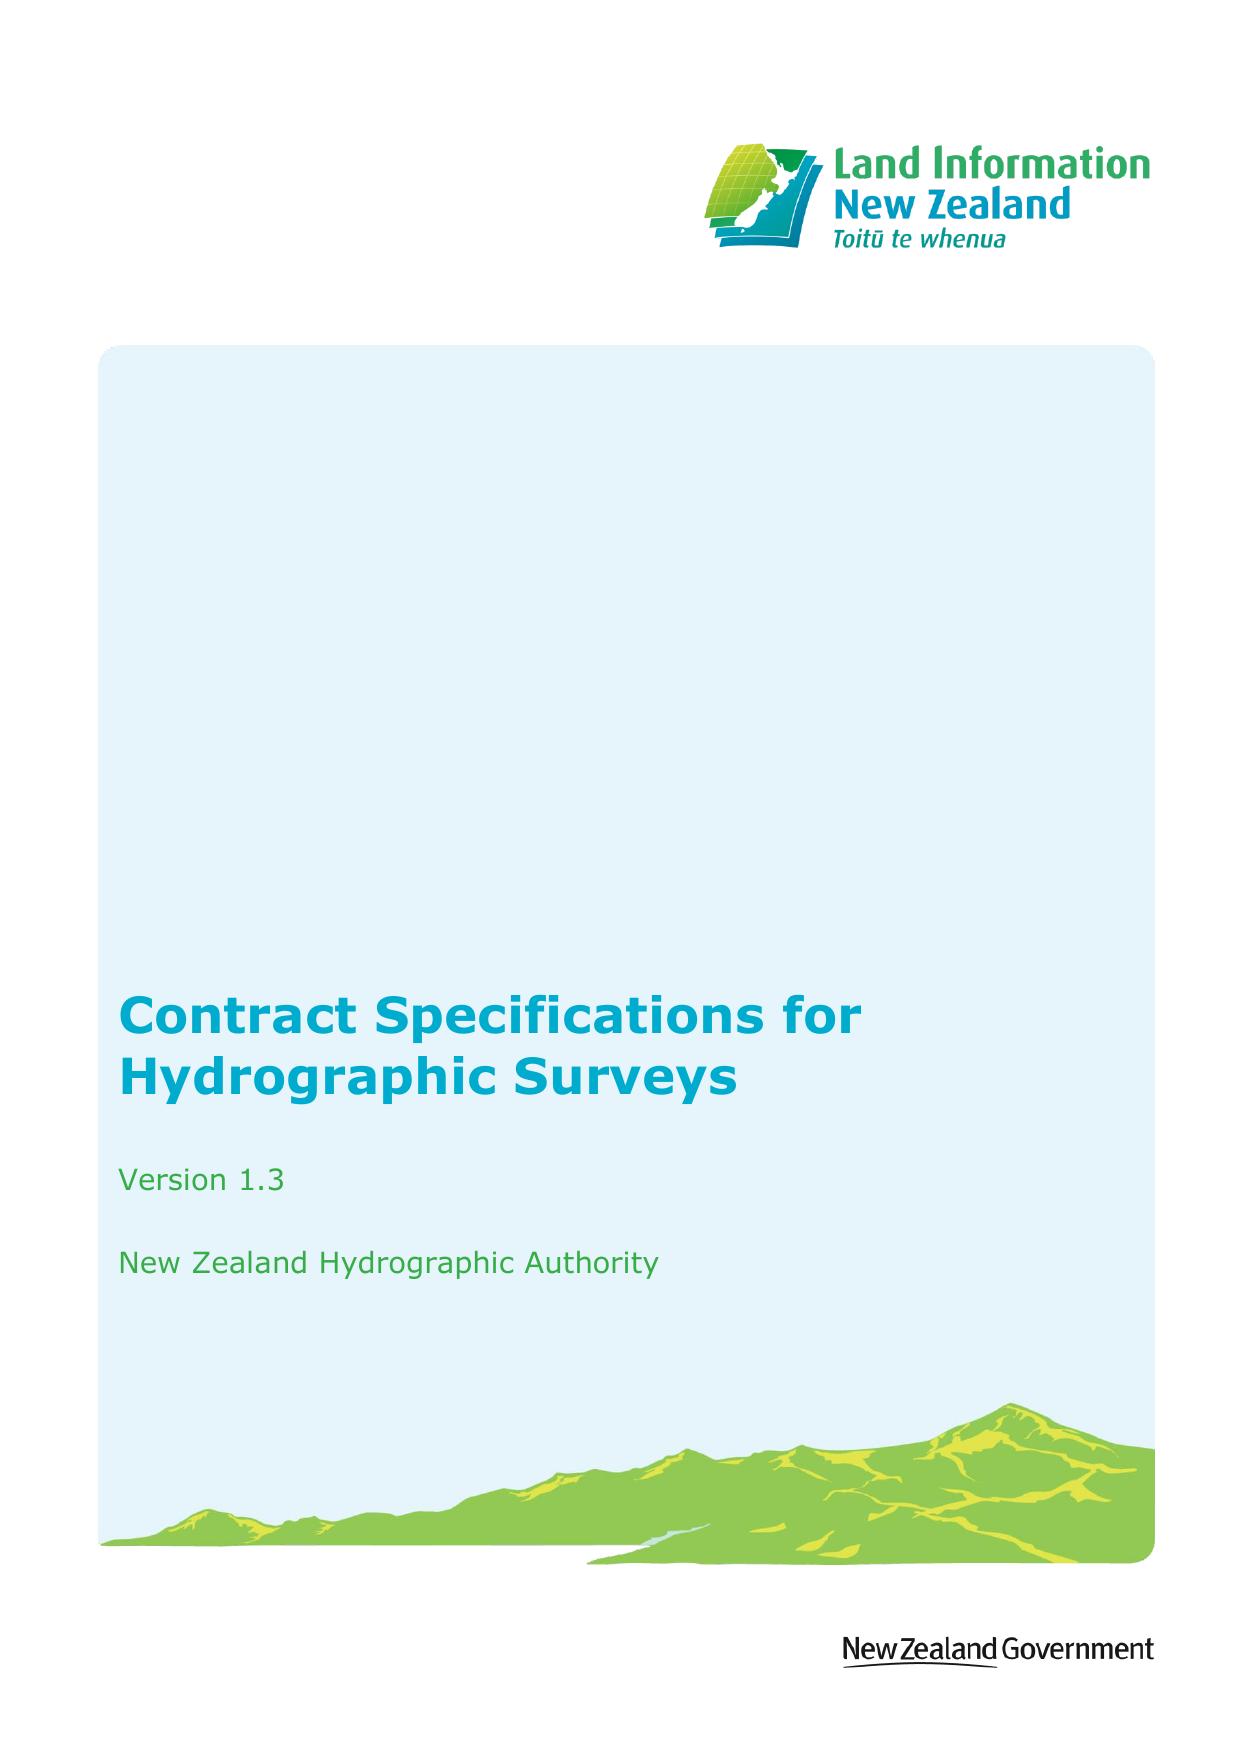 Contract Specifications for Hydrographic Surveys